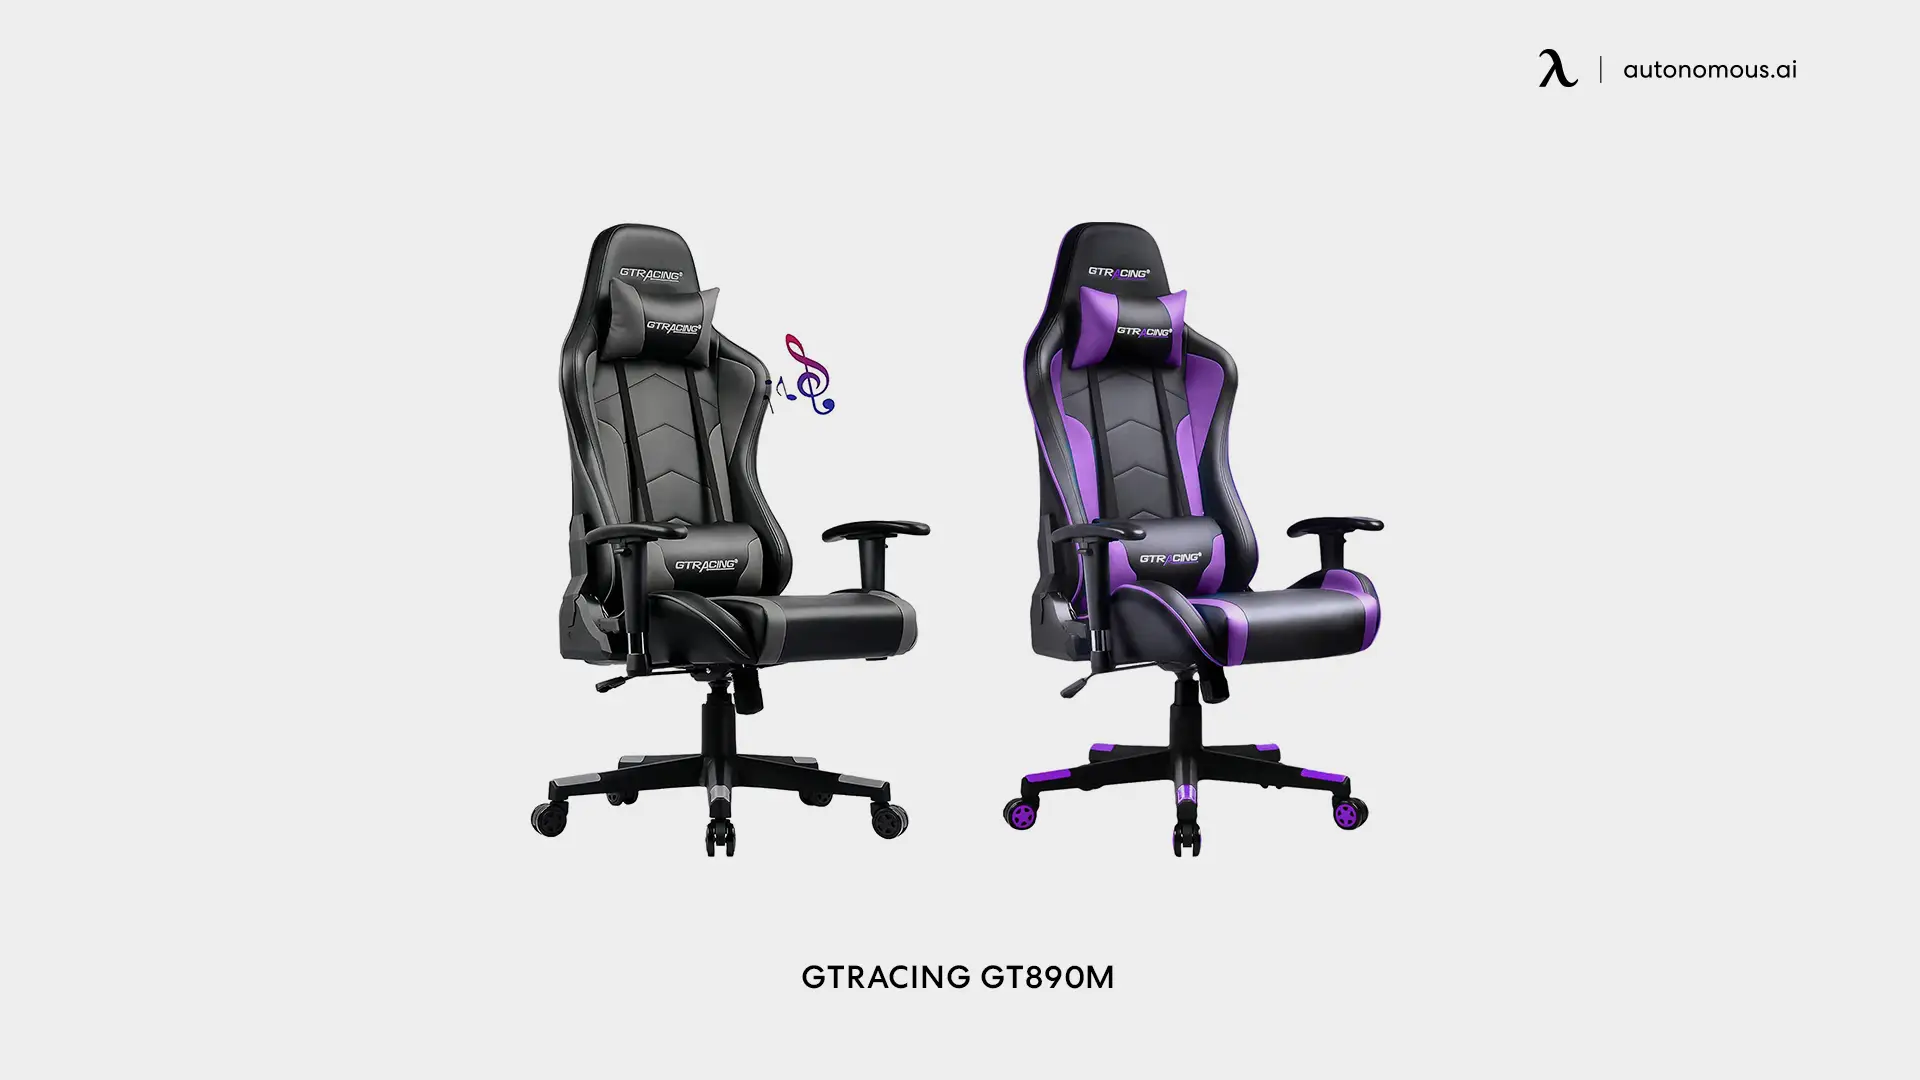 GTRACING GT890M Black and white gaming chair